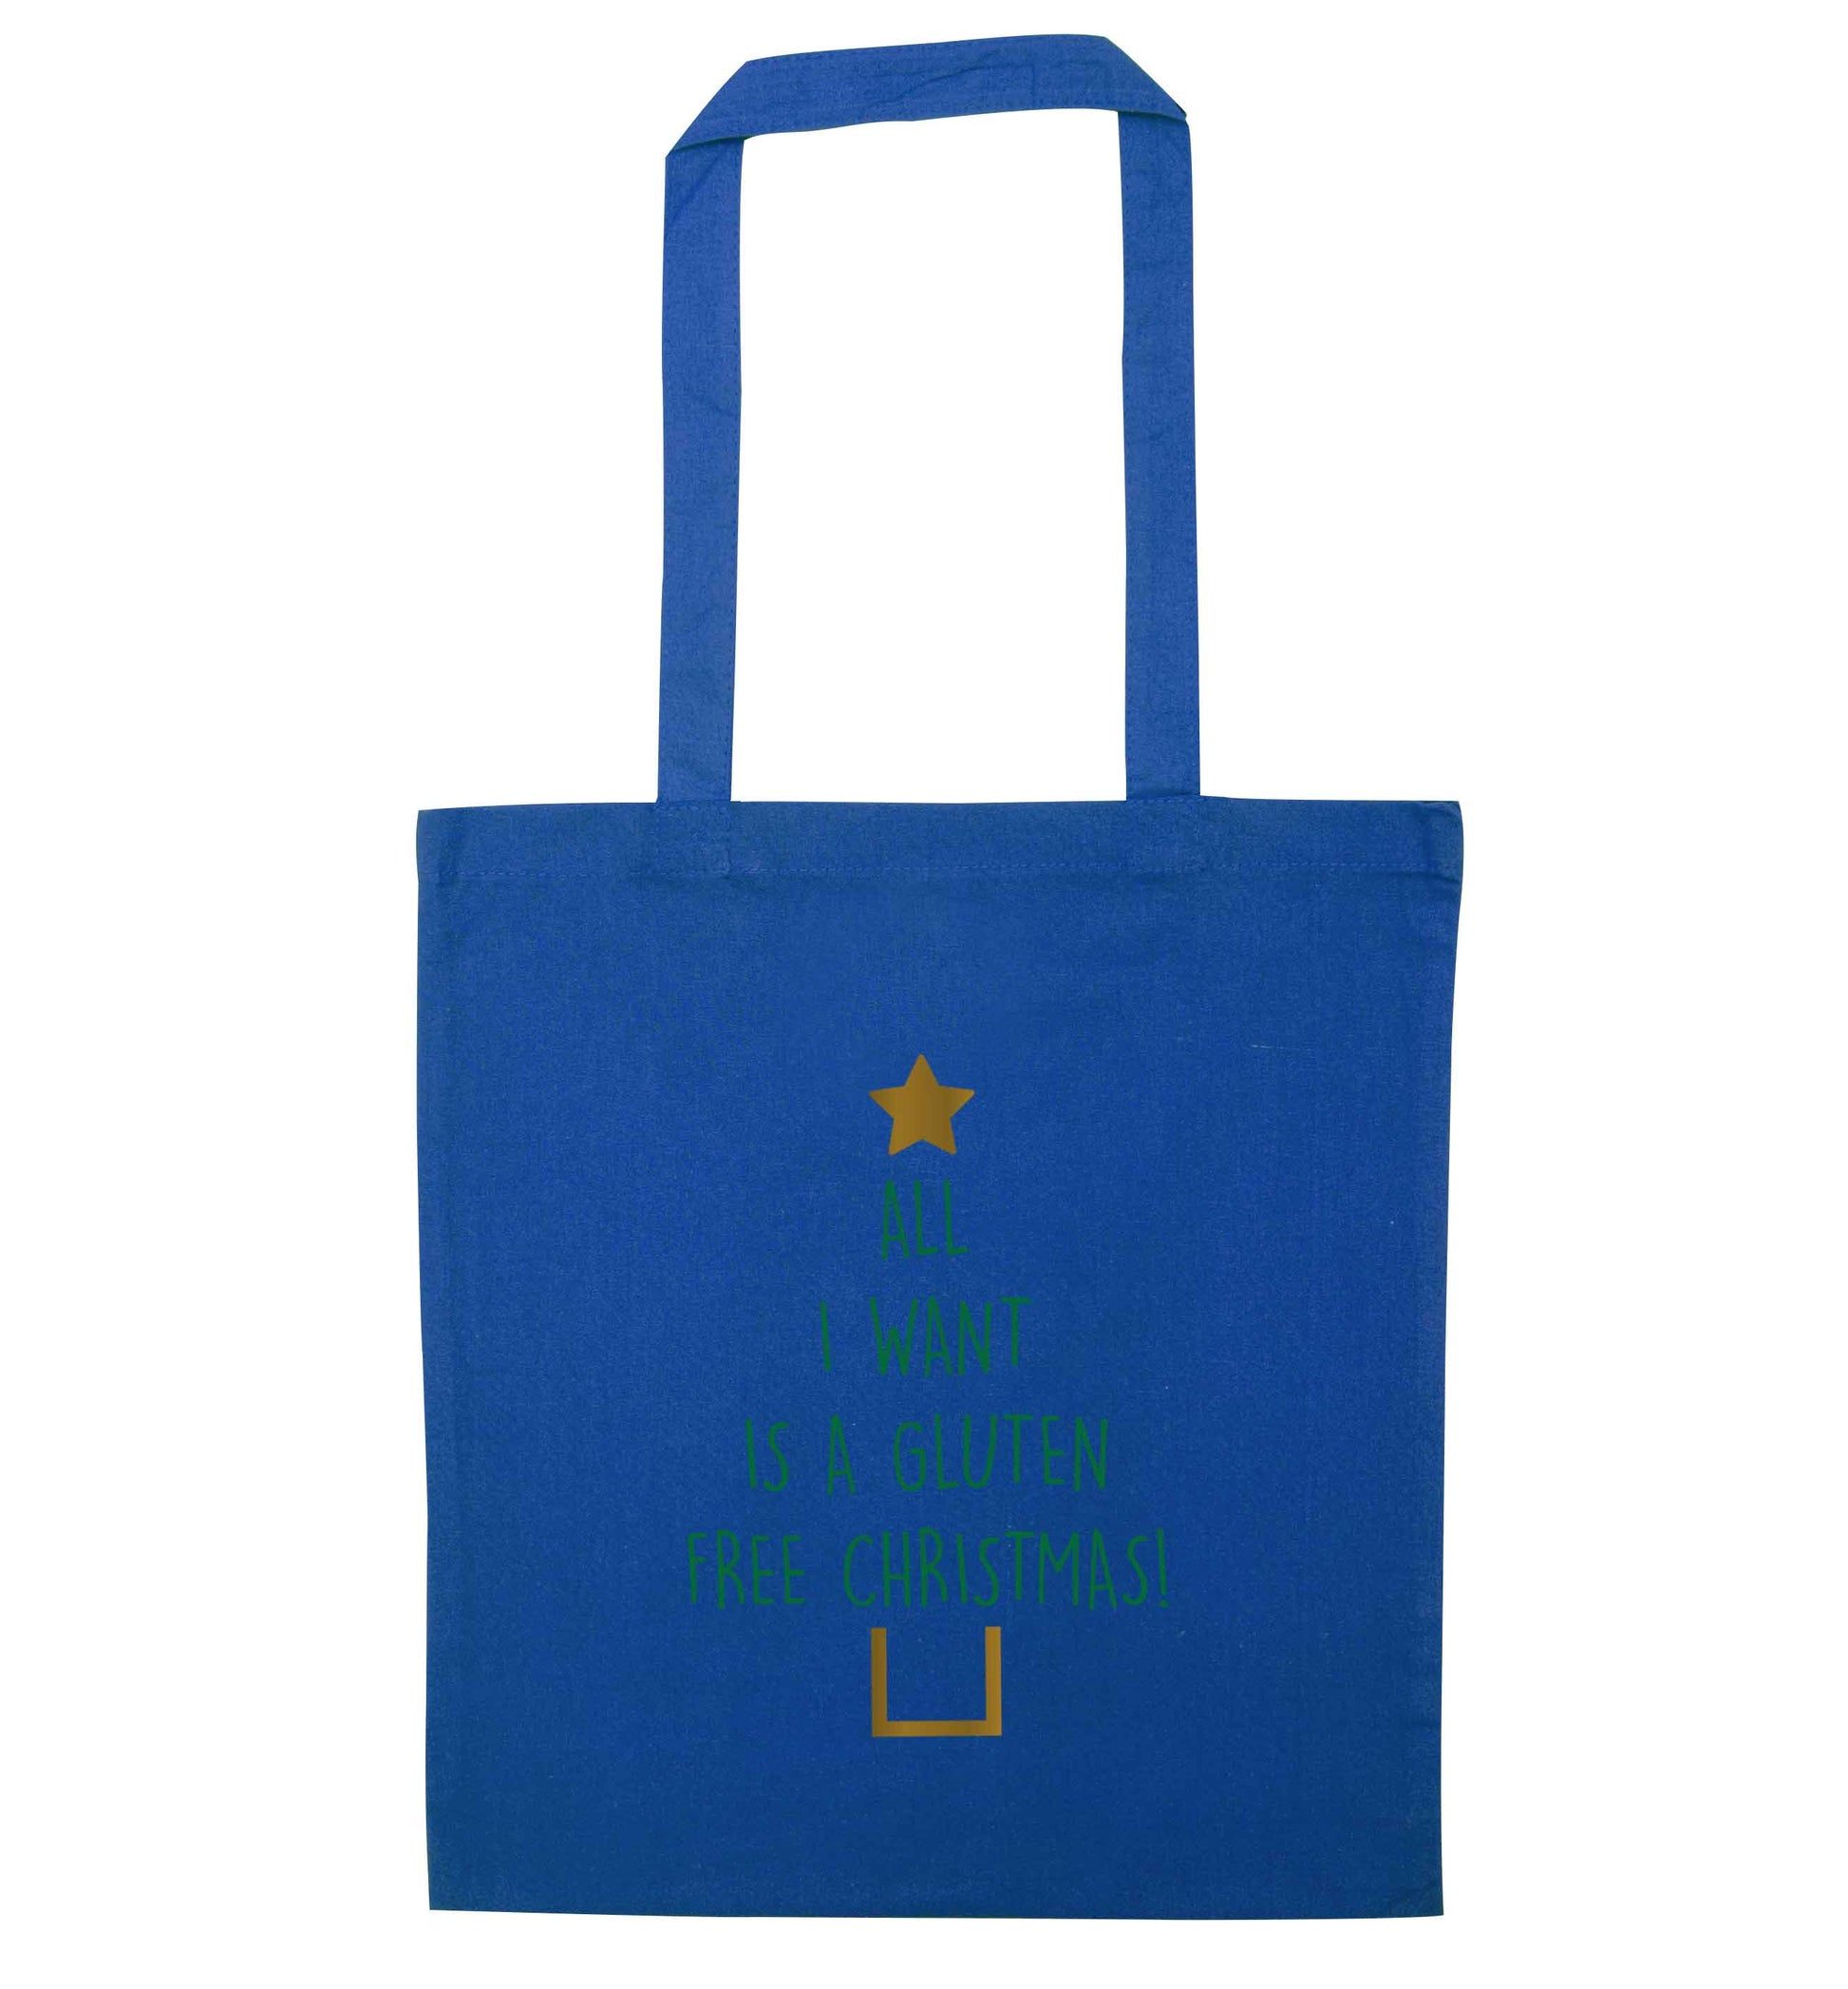 All I want is a gluten free Christmas blue tote bag